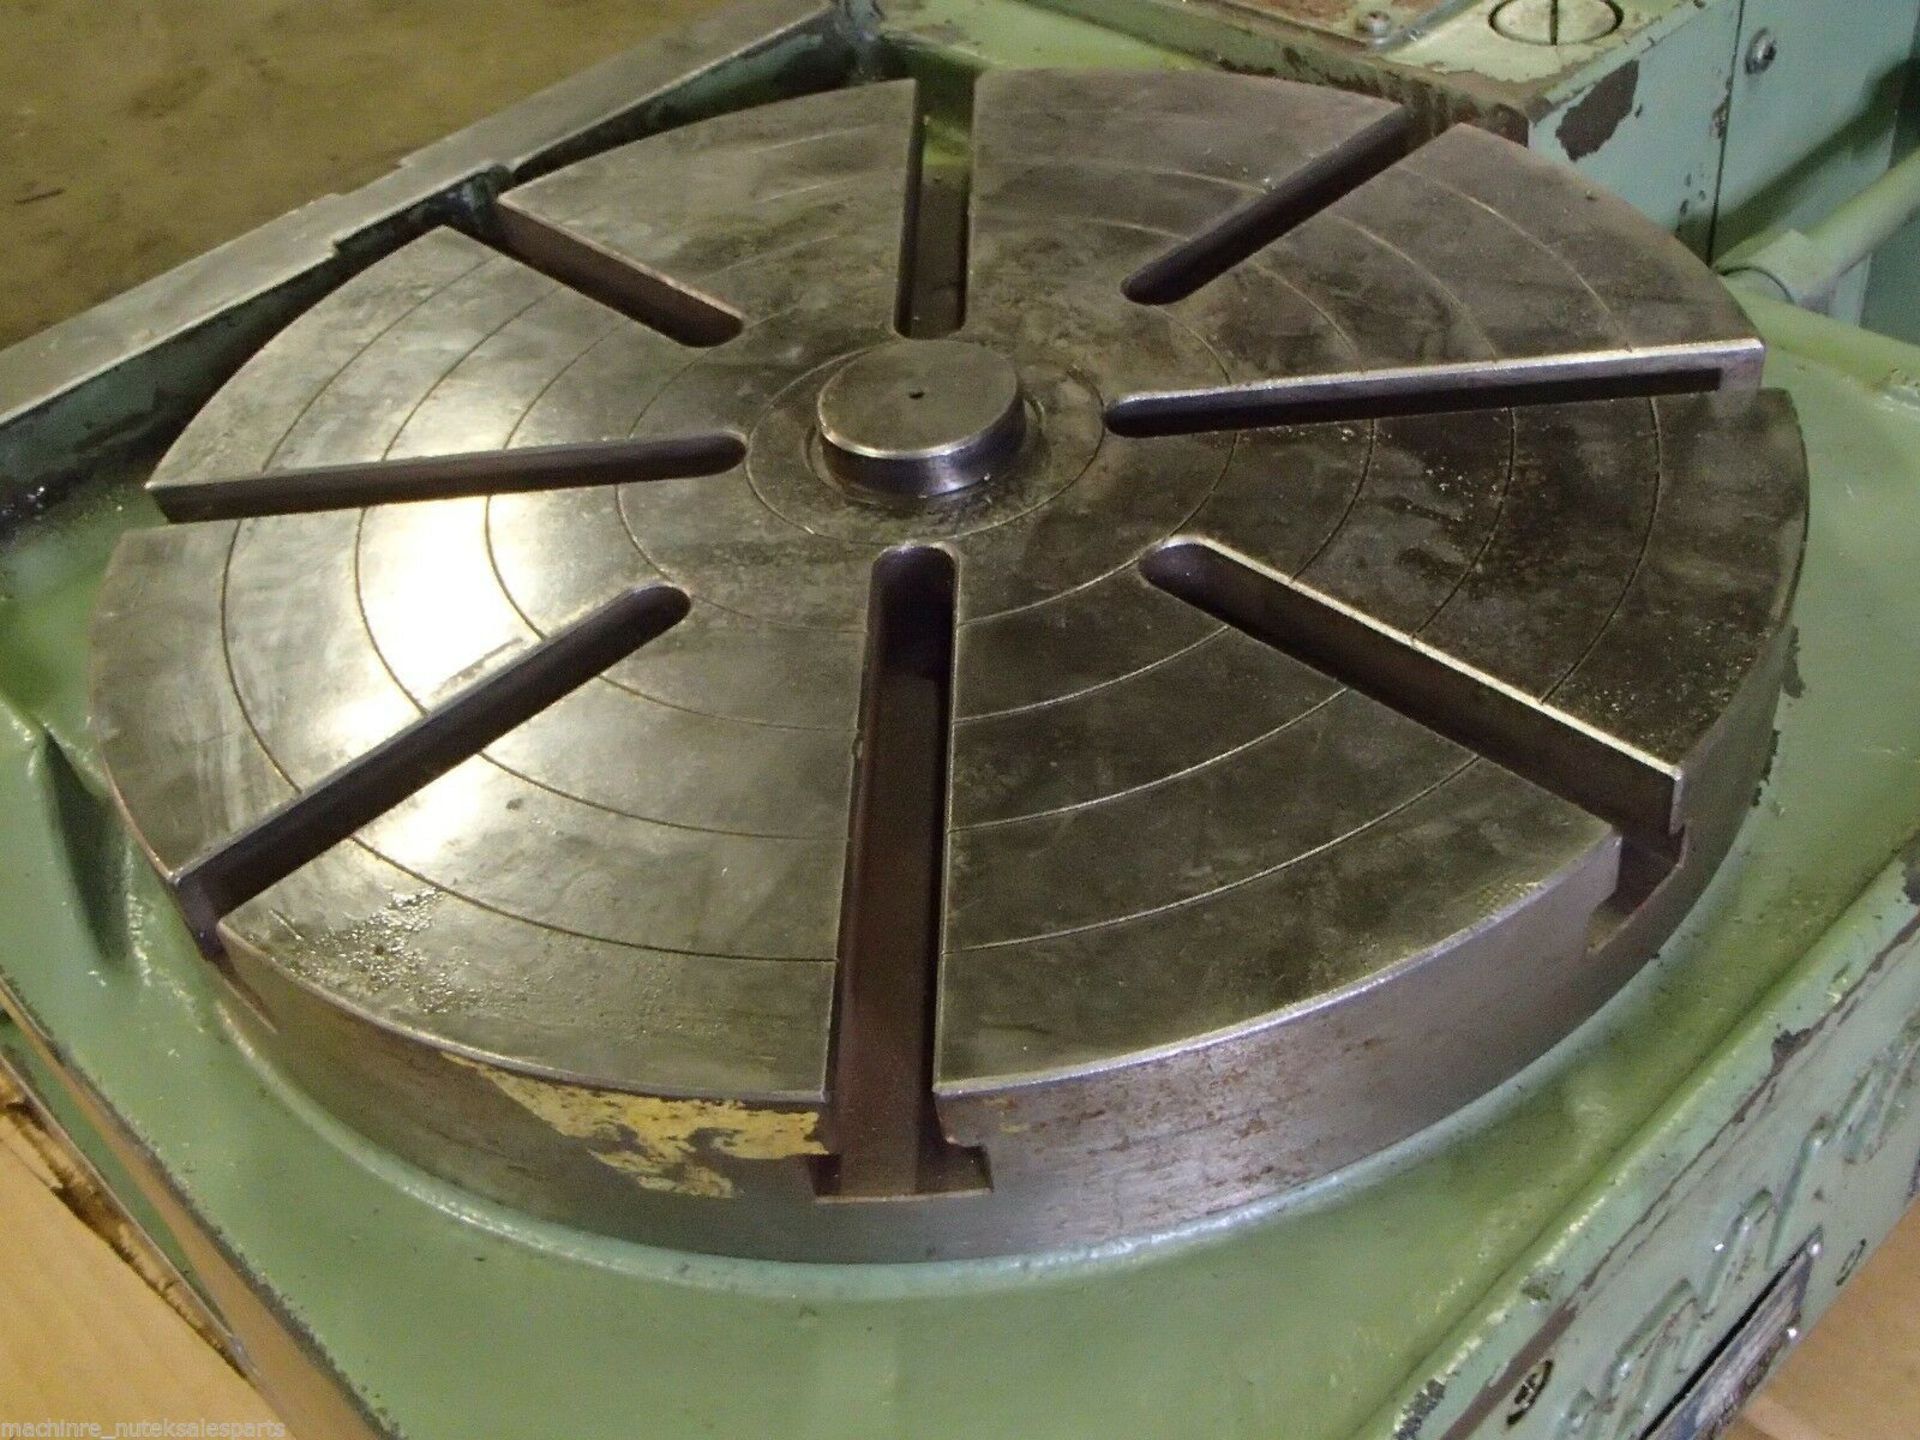 12" TSUDAKOMA 4th Axis Rotary Table w Tailstock #RNCV-300L - Image 4 of 5